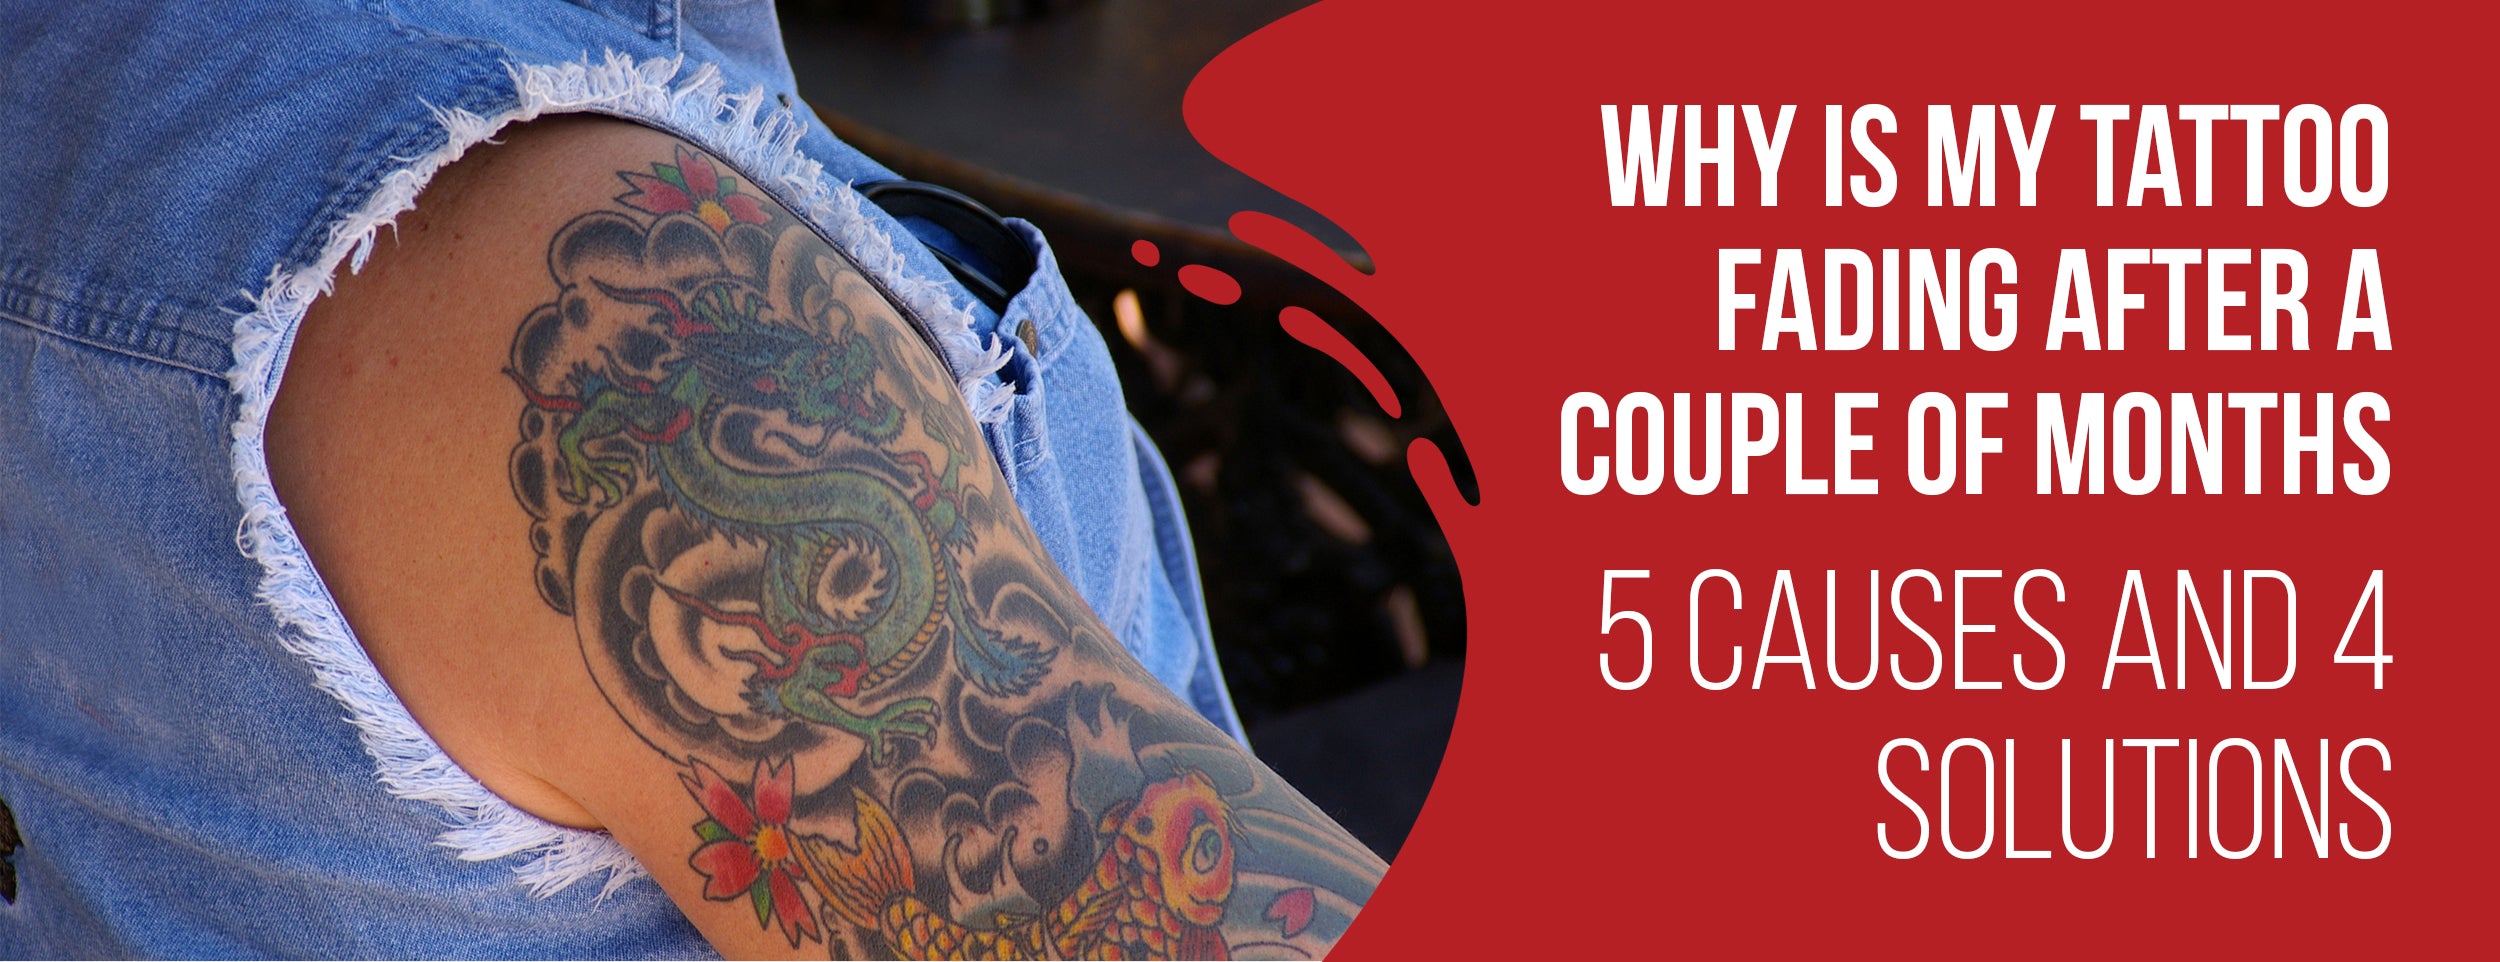 Why is my tattoo fading after a couple months: 5 Causes – Dr. Numb®